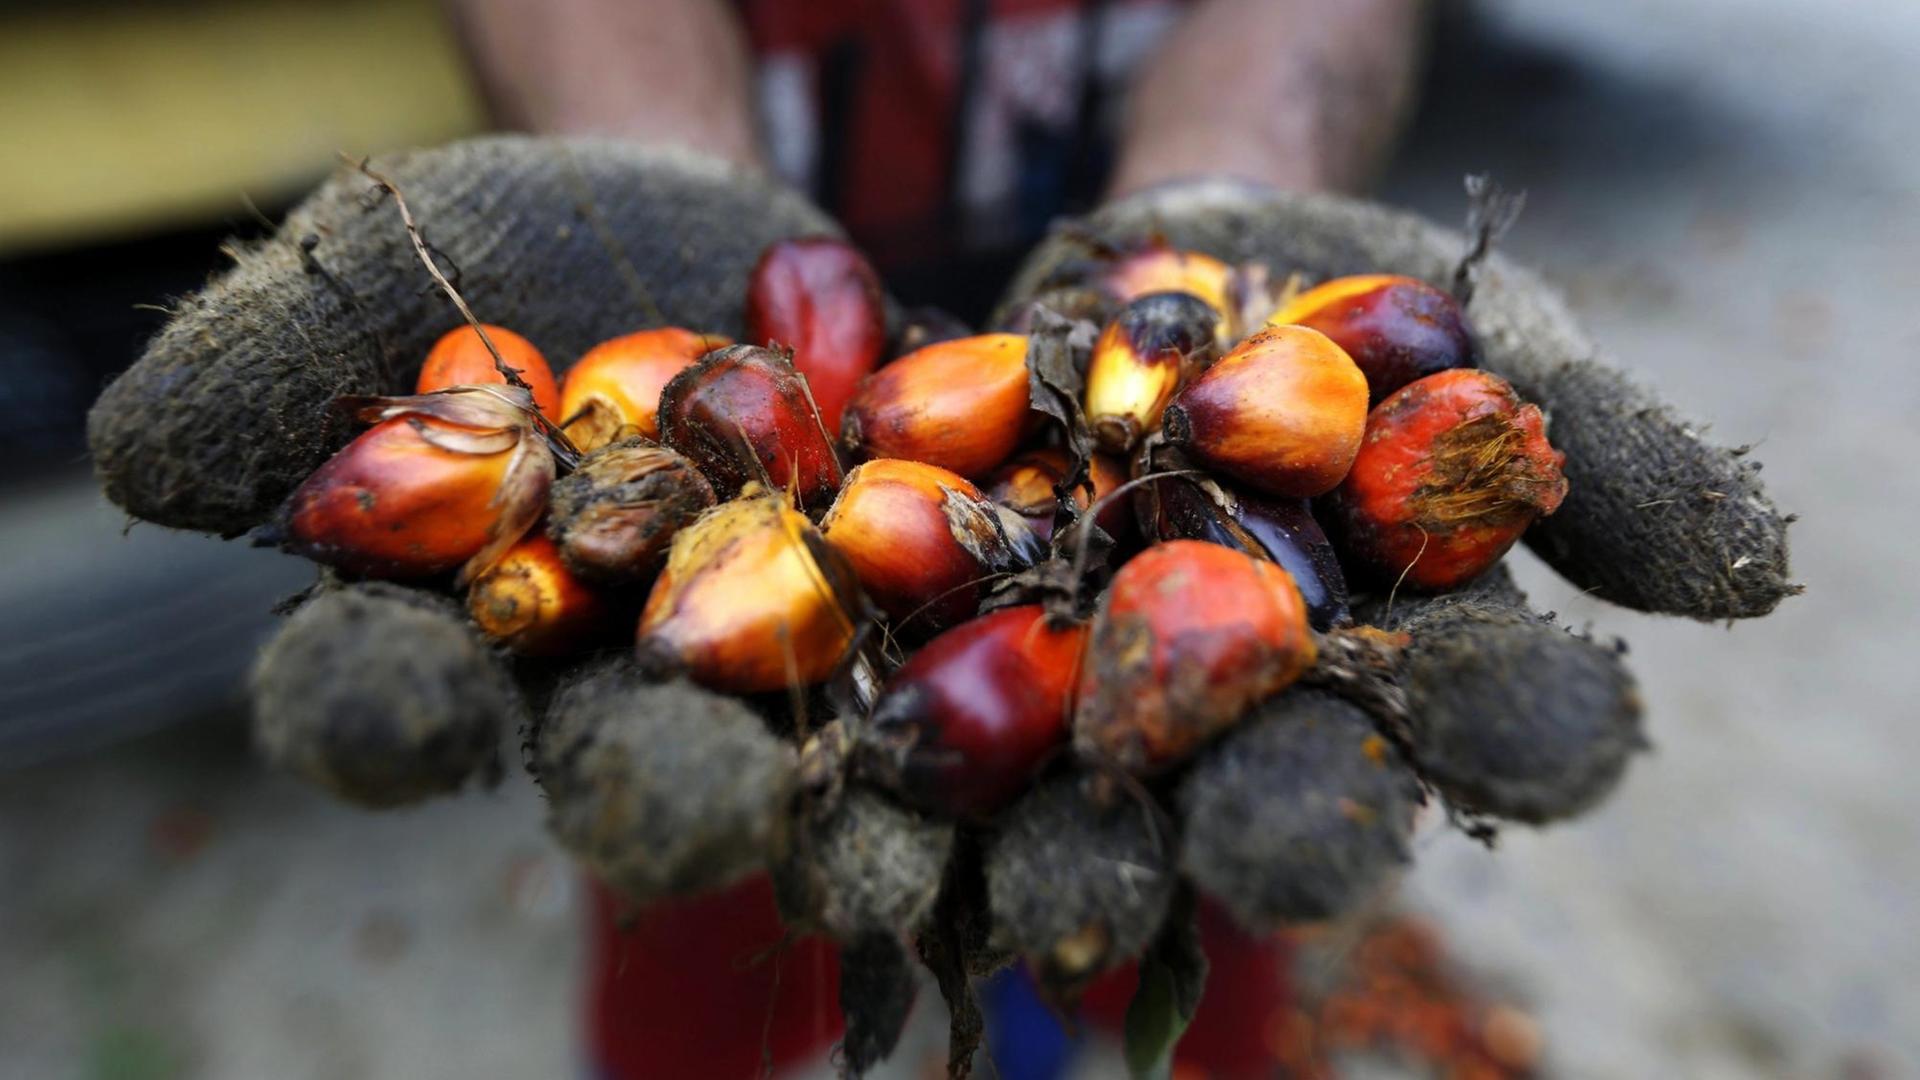 An Indonesian palm oil farmer holds palm oil fruits in his hands